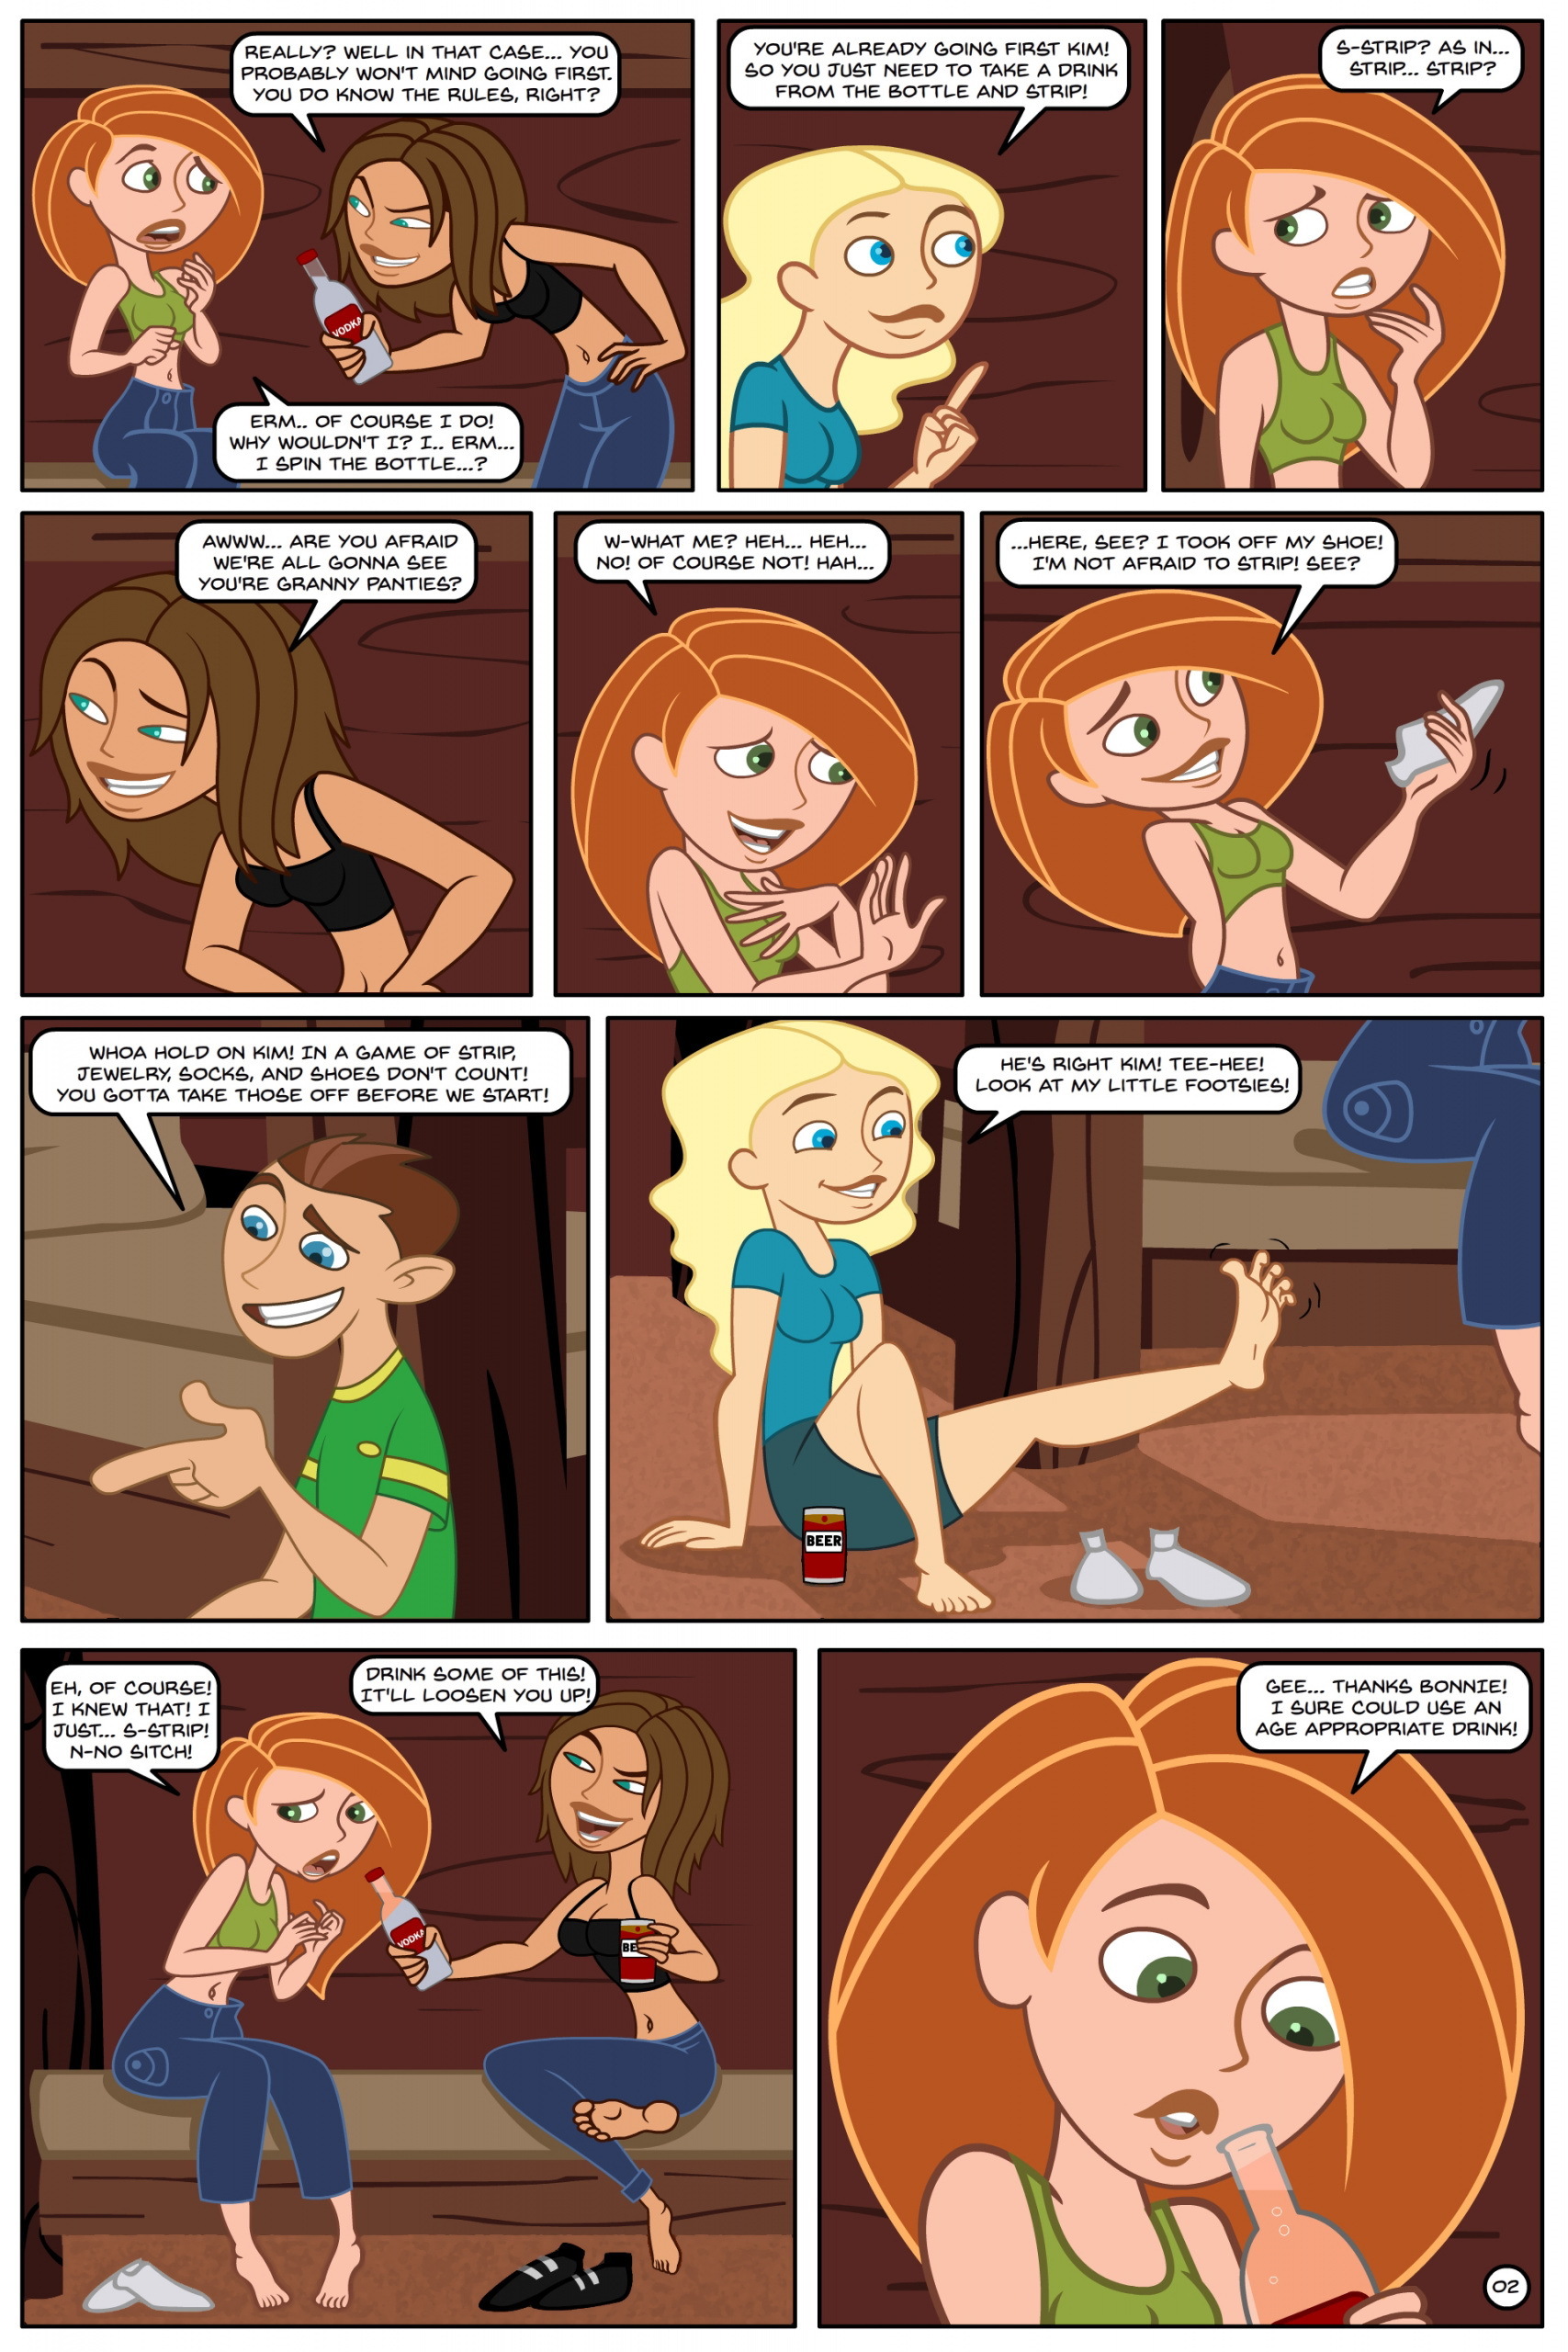 Kim Possible Spin, Sip & Strip! - Page 3